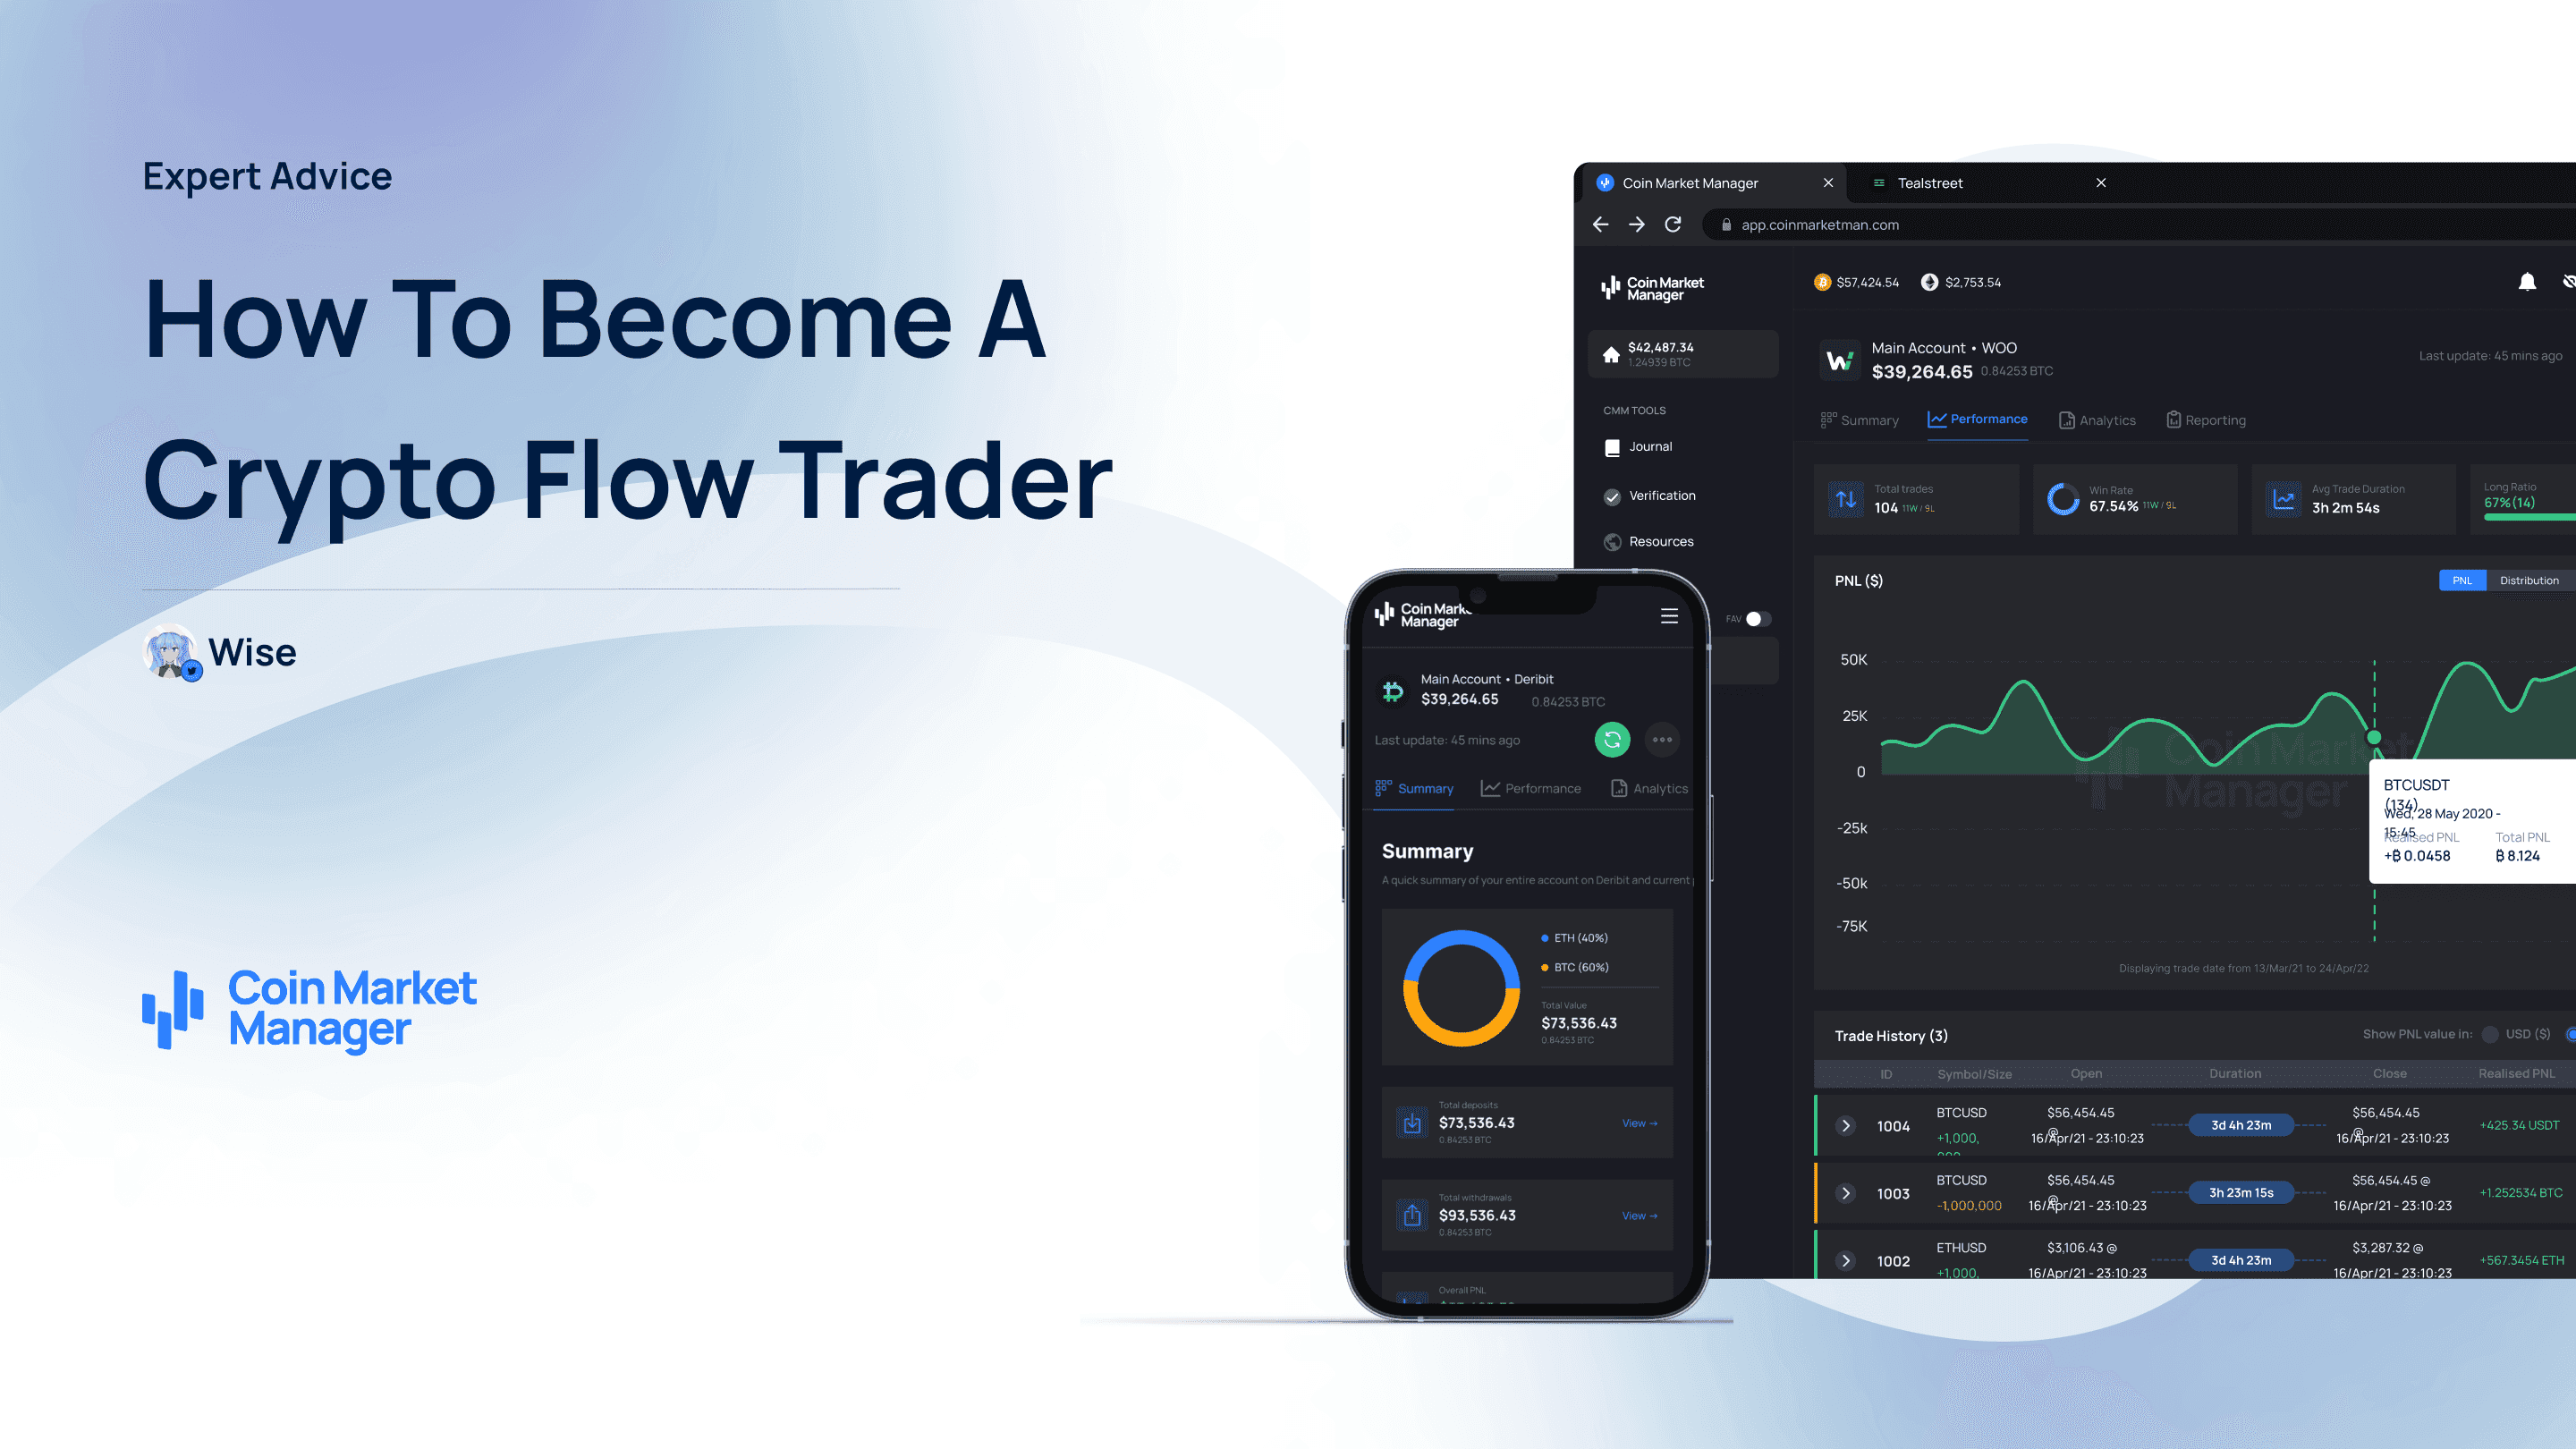 How To Become A Crypto Flow Trader